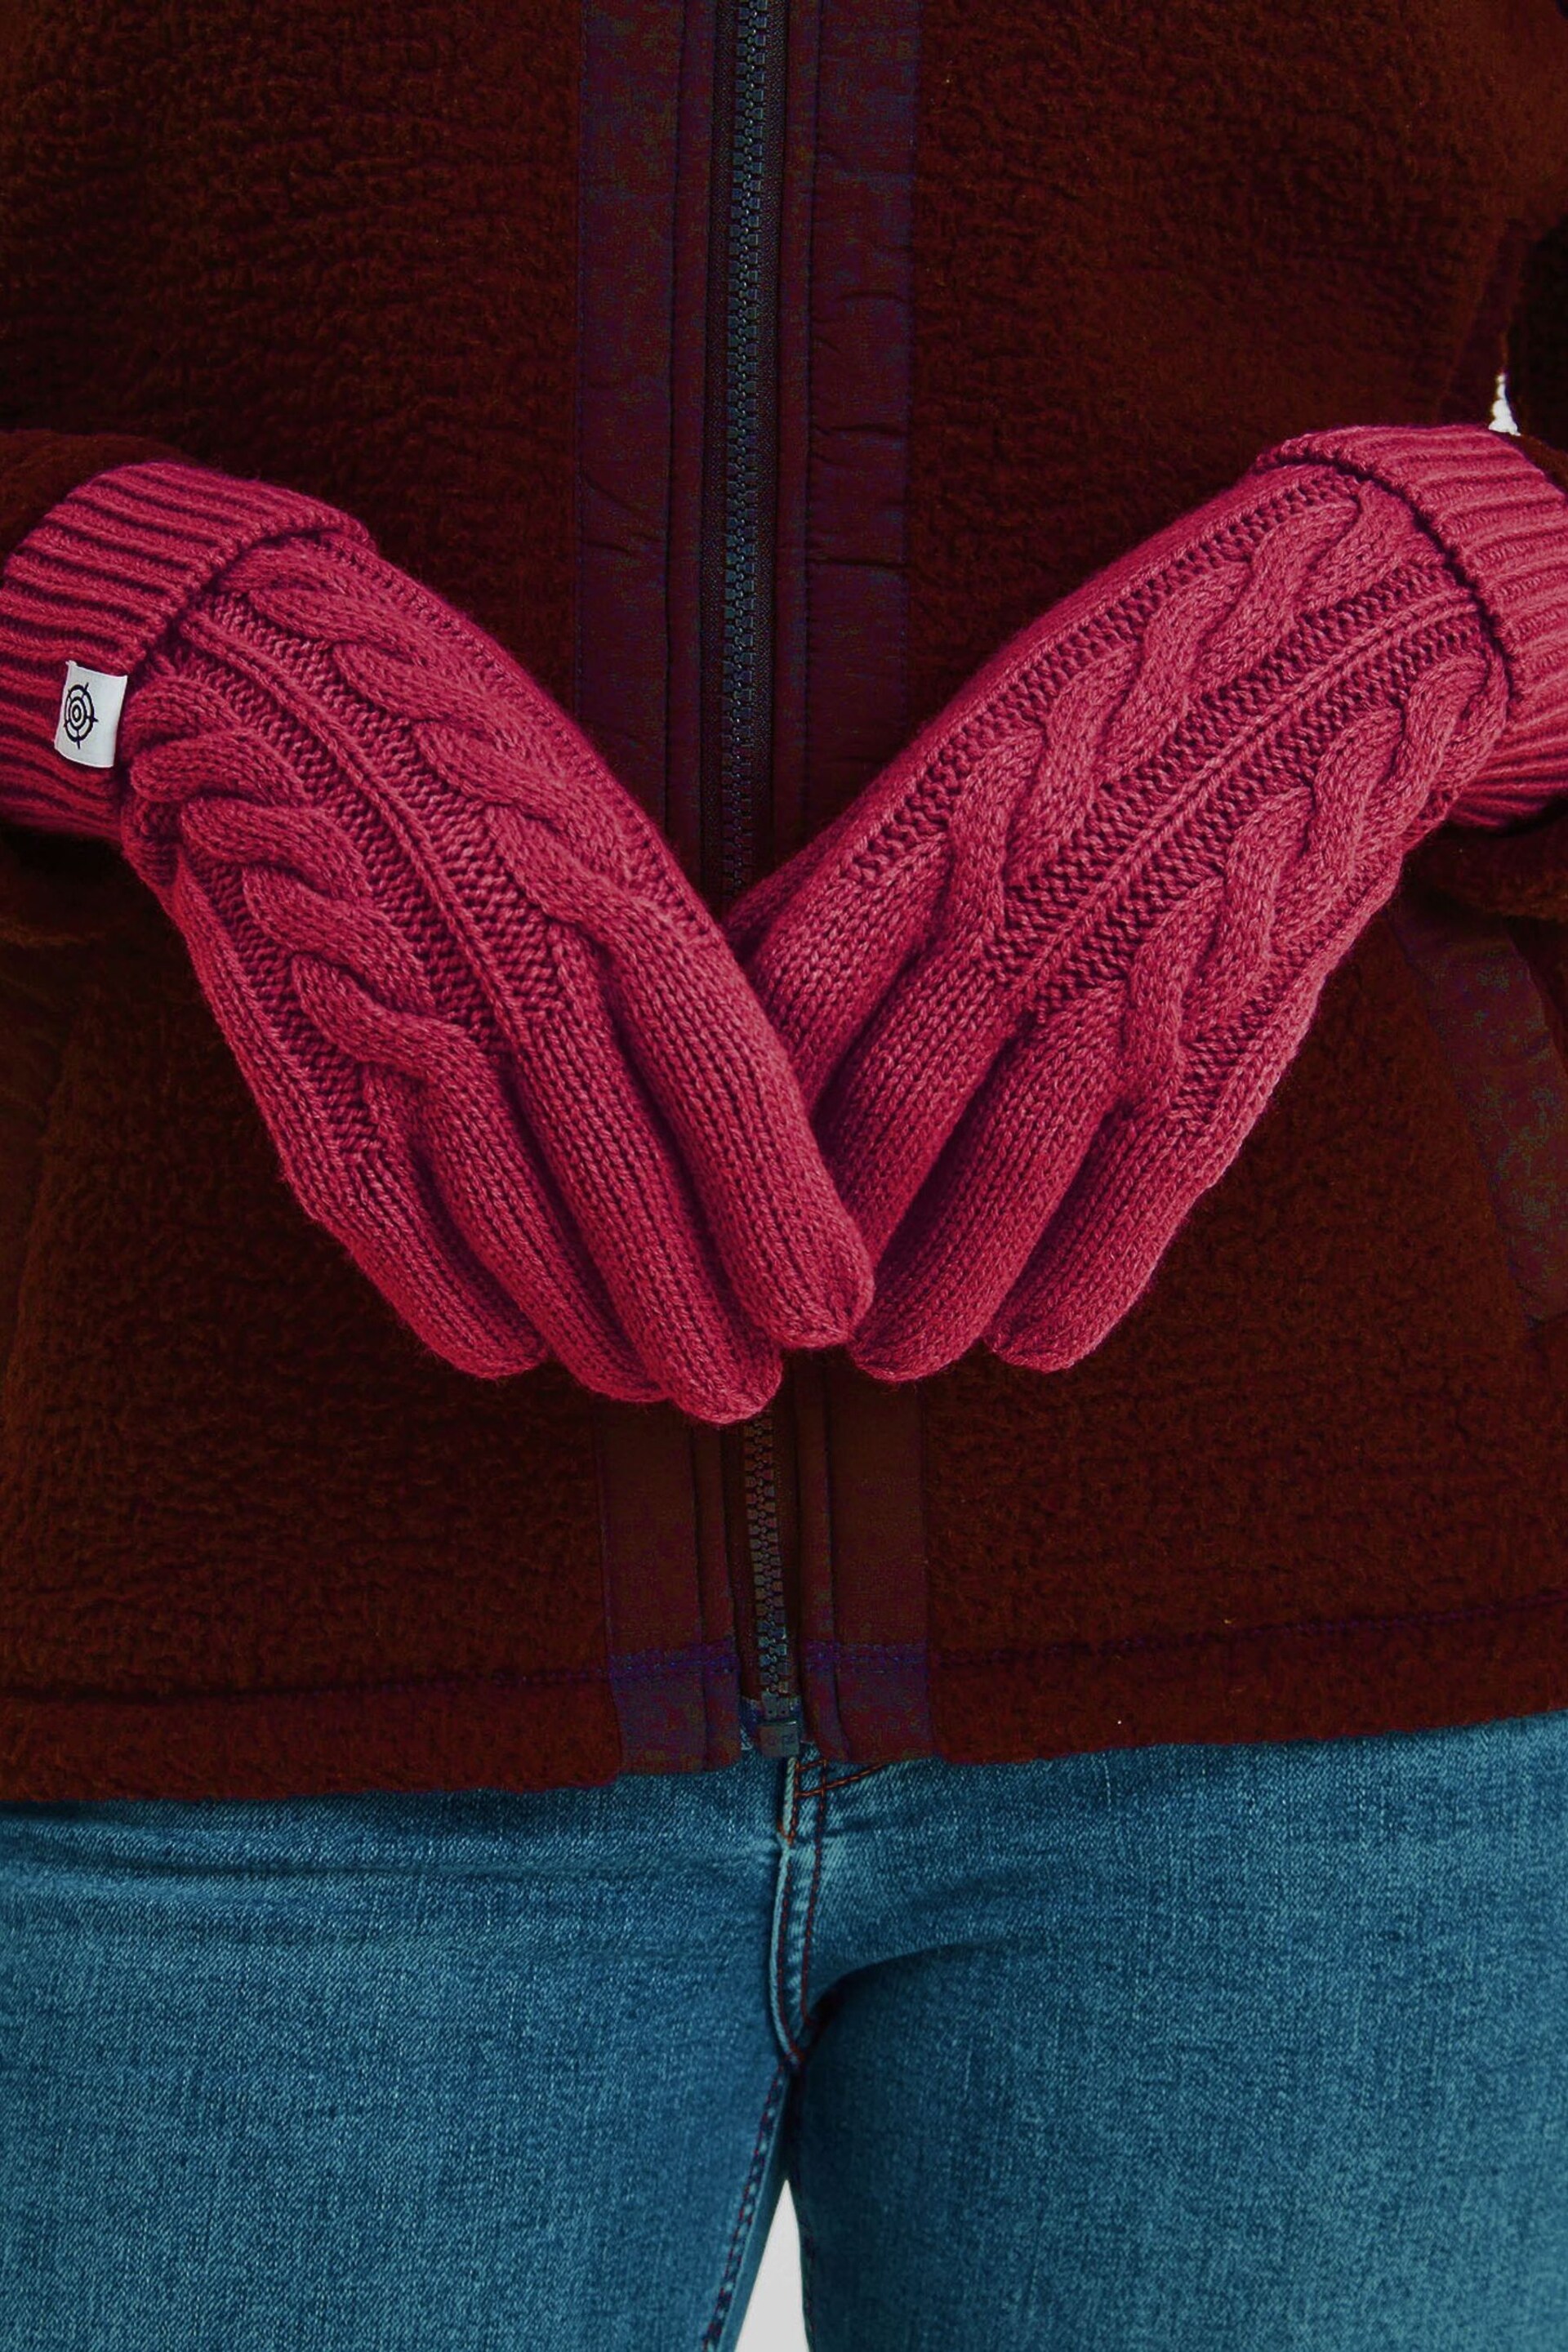 Tog 24 Dark Pink Grouse Knitted Gloves - Image 1 of 2